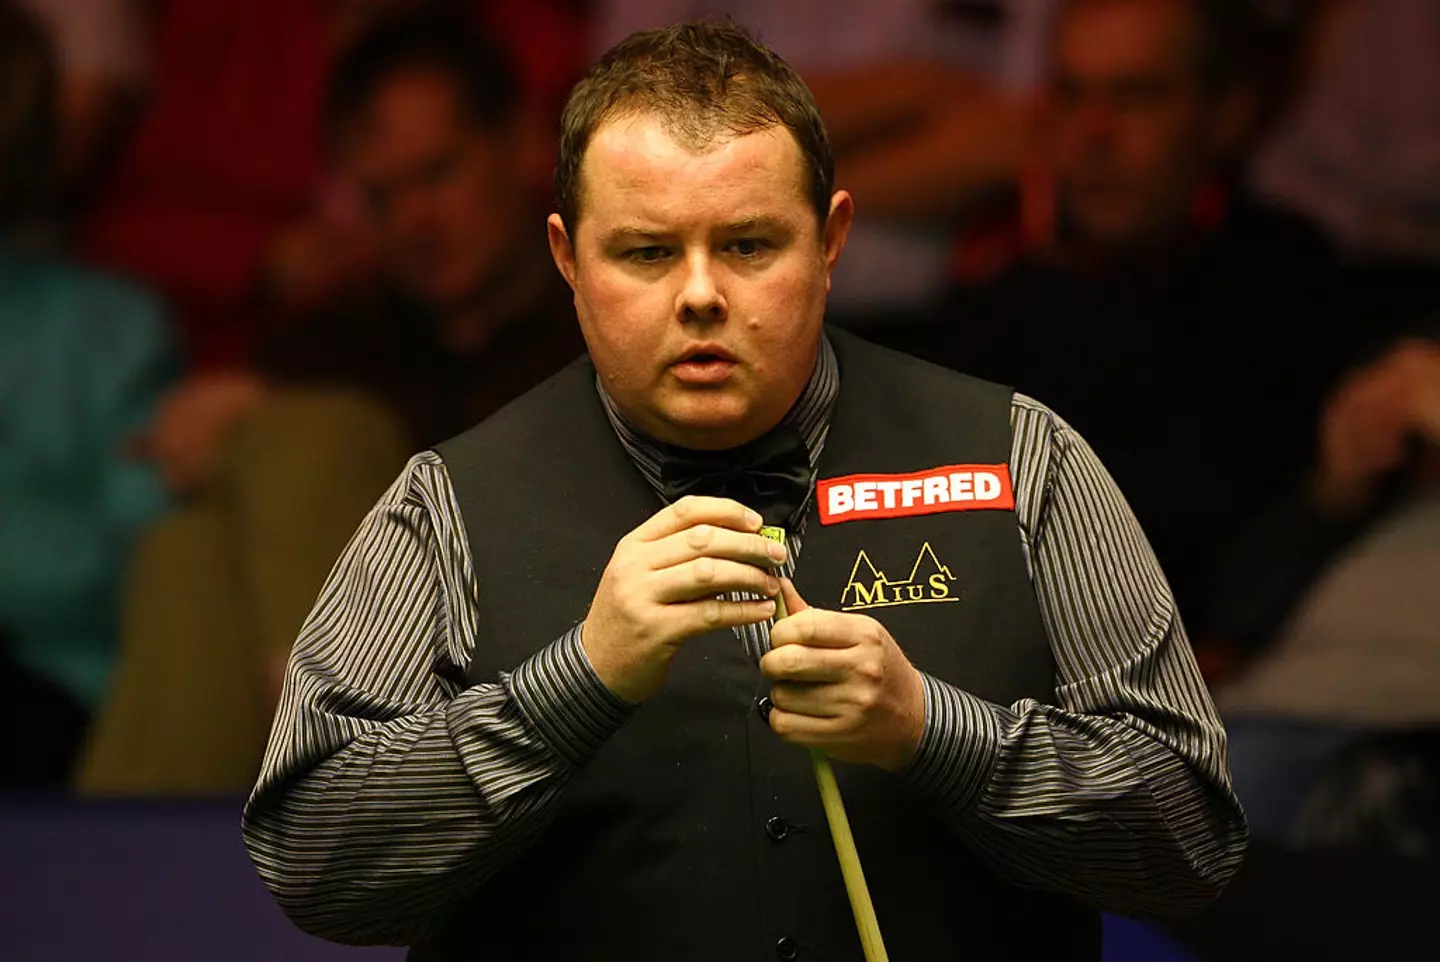 Stephen Lee pictured during his 2009 World Championship match against Ryan Day (